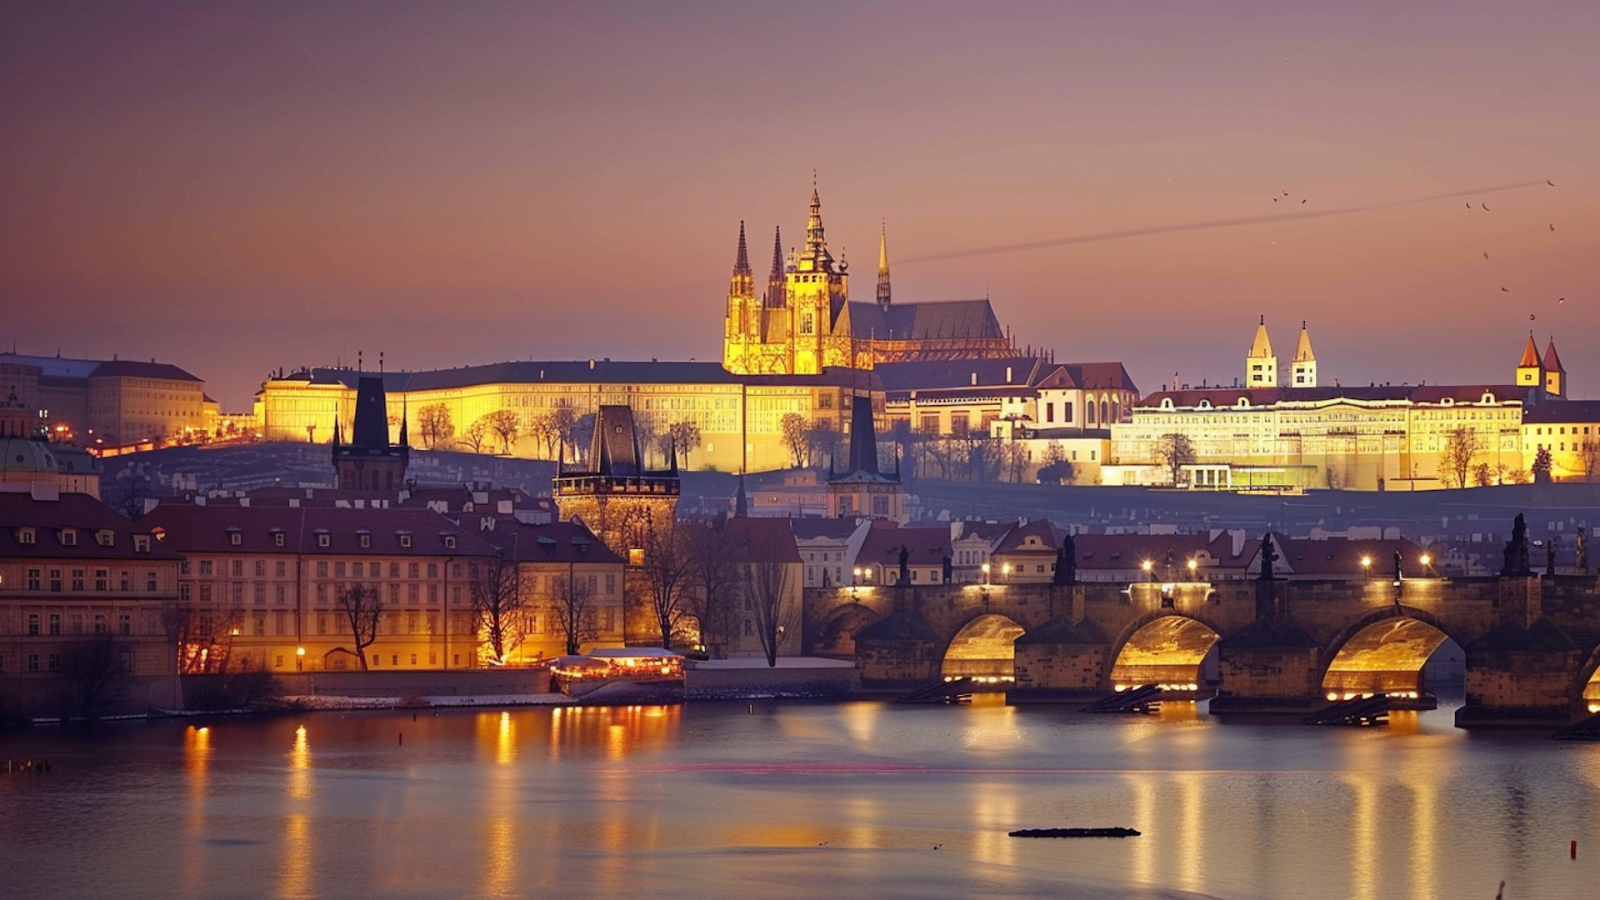 The Prague Castle lit up at sunset with the Vltava River in the foreground